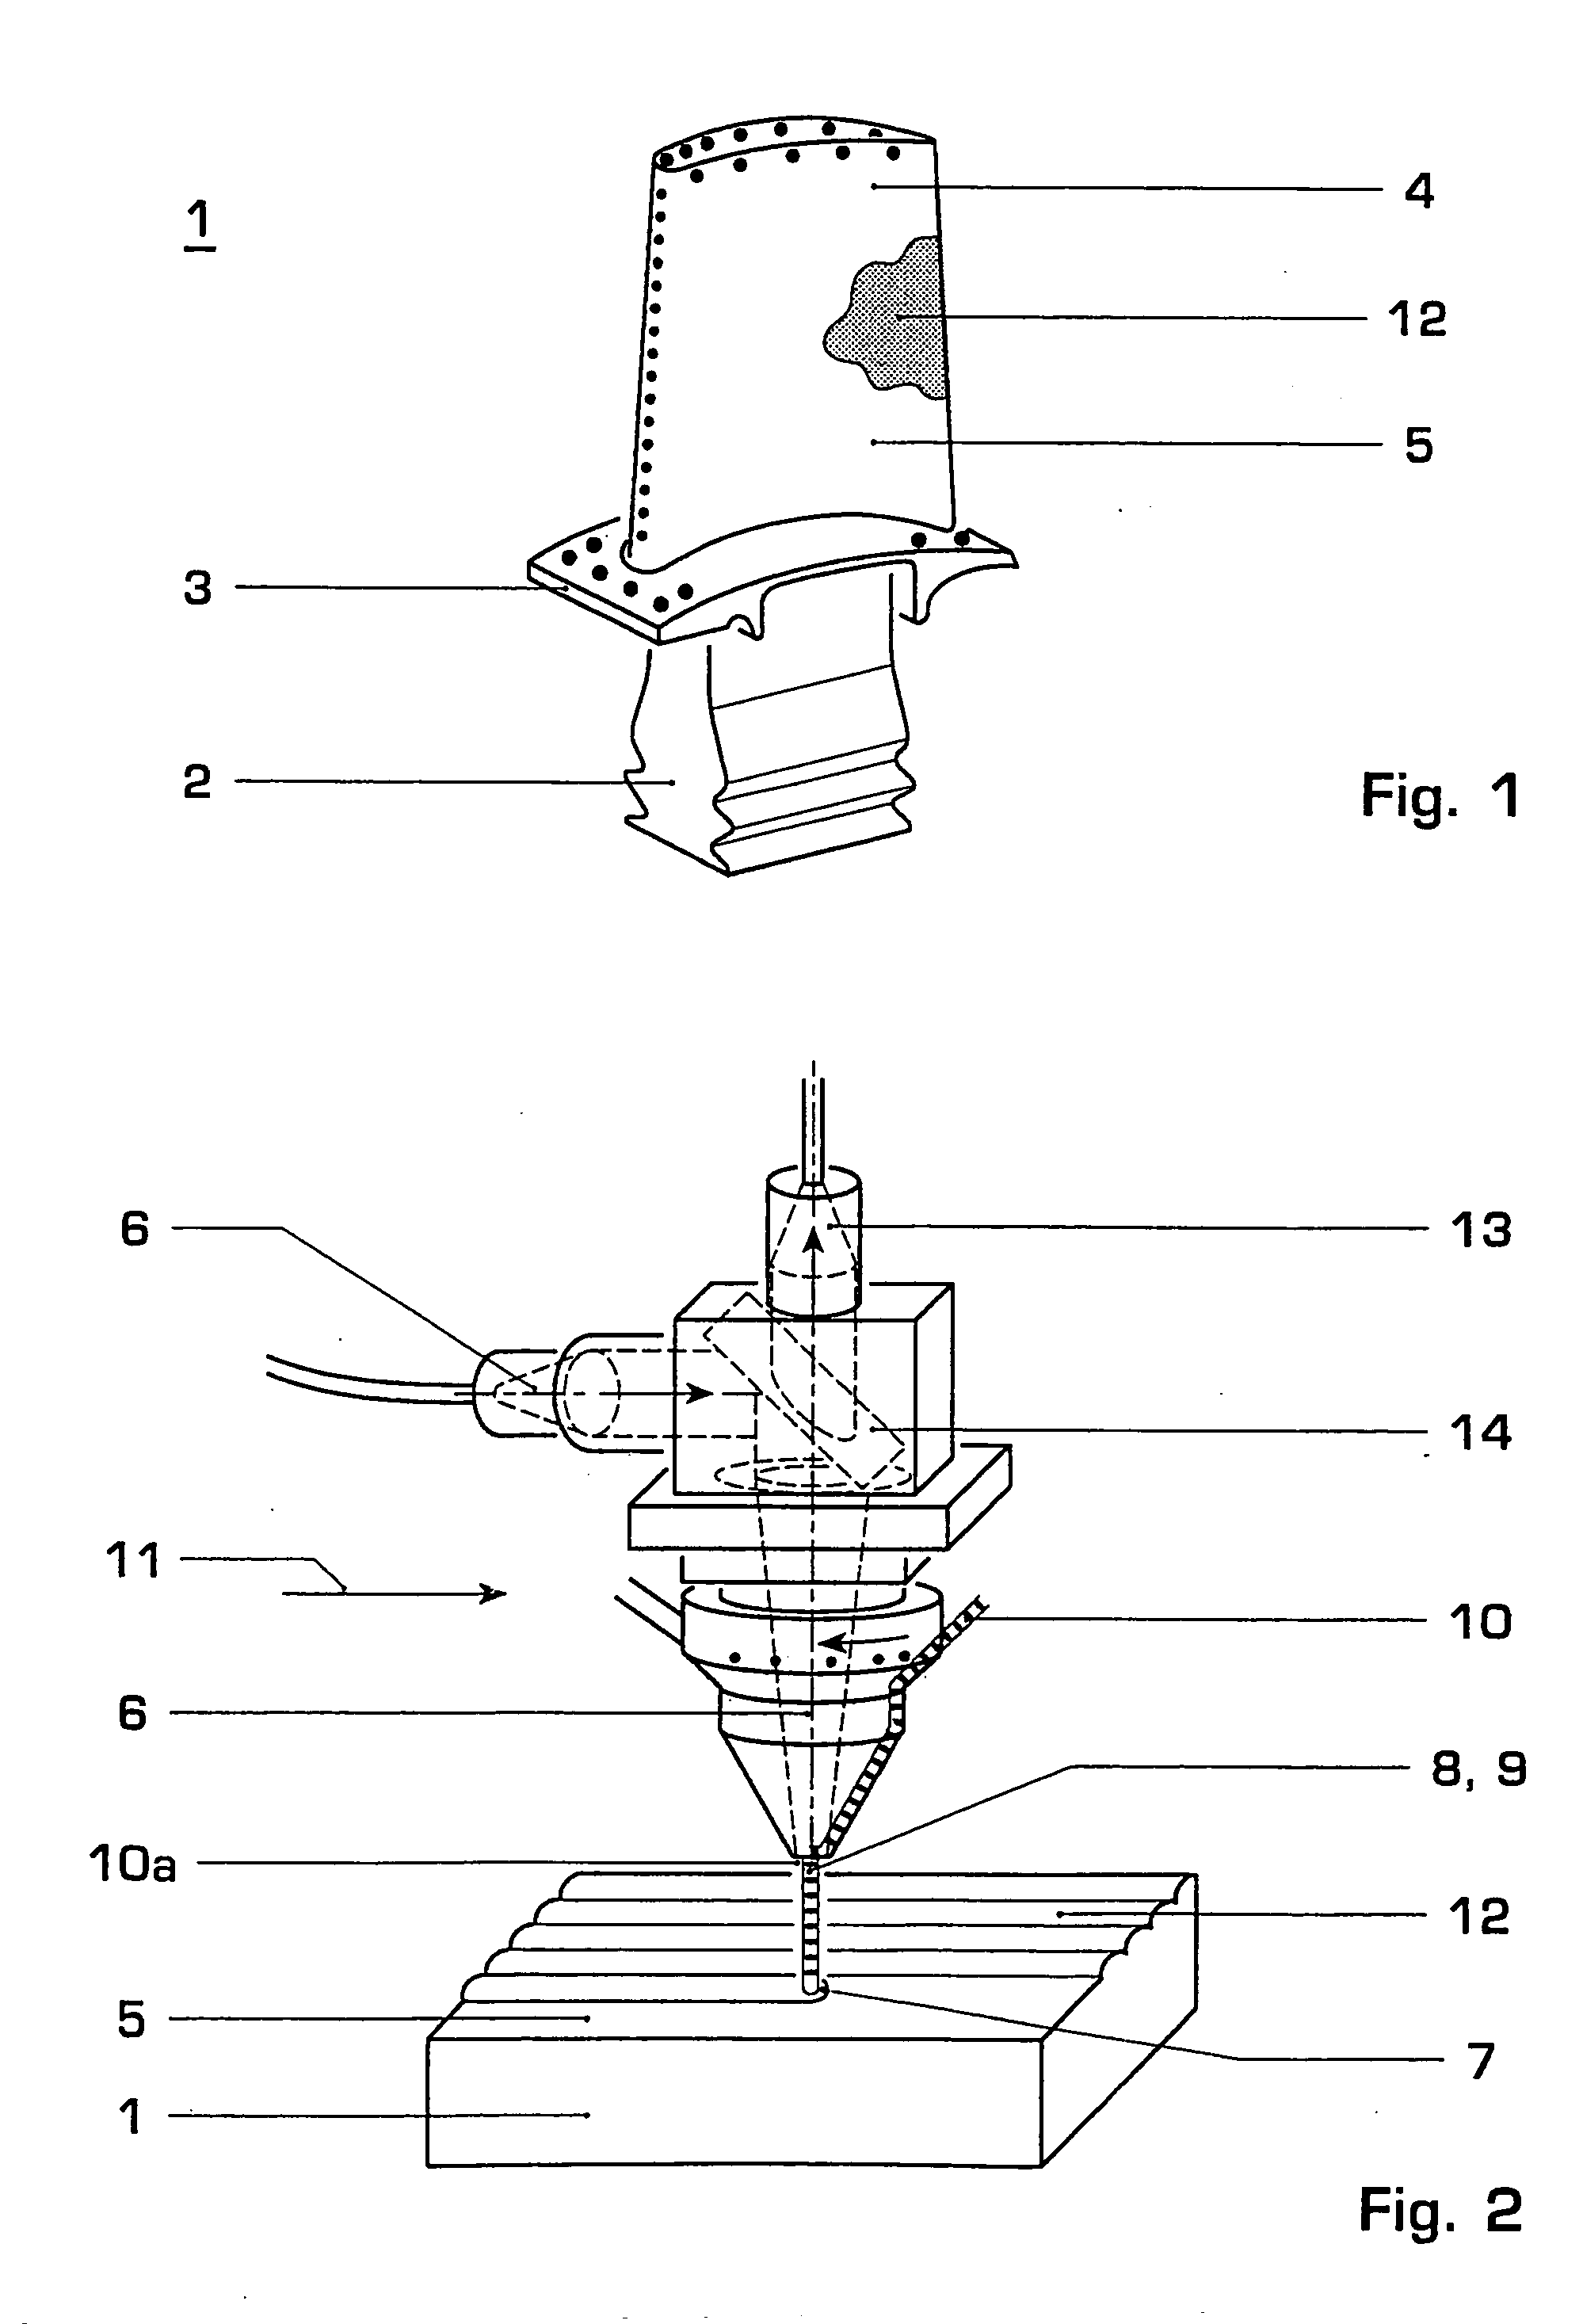 Method for controlling the microstructure of a laser metal formed hard layer